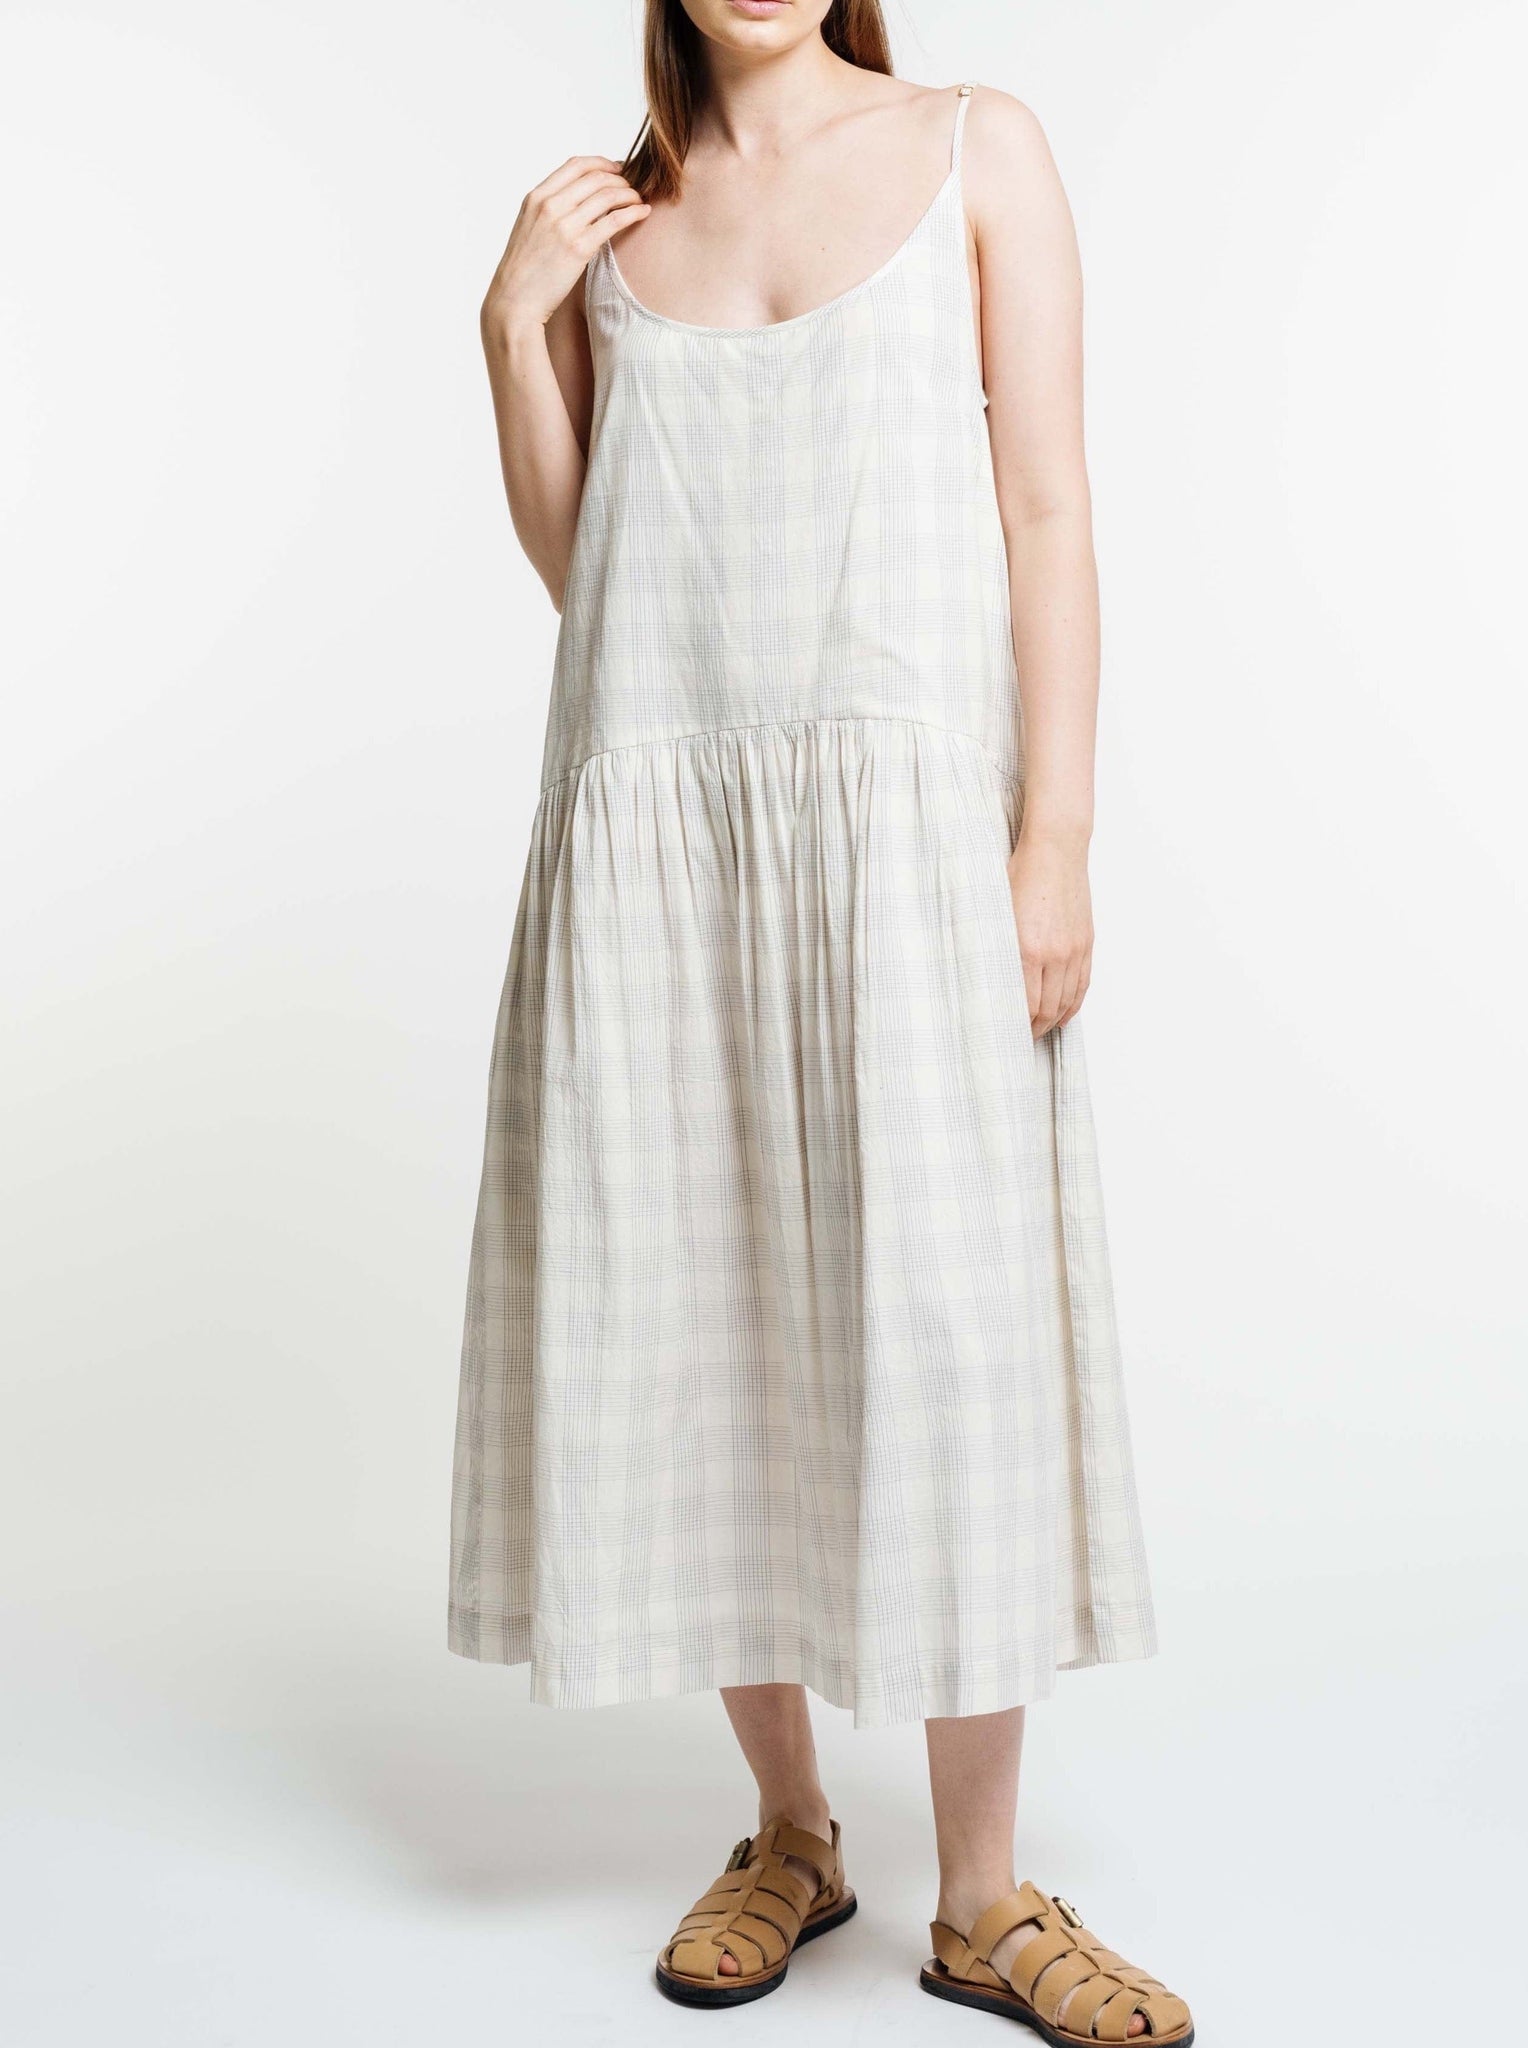 The model is wearing a white and beige Portrait Dress - Rivera Plaid.